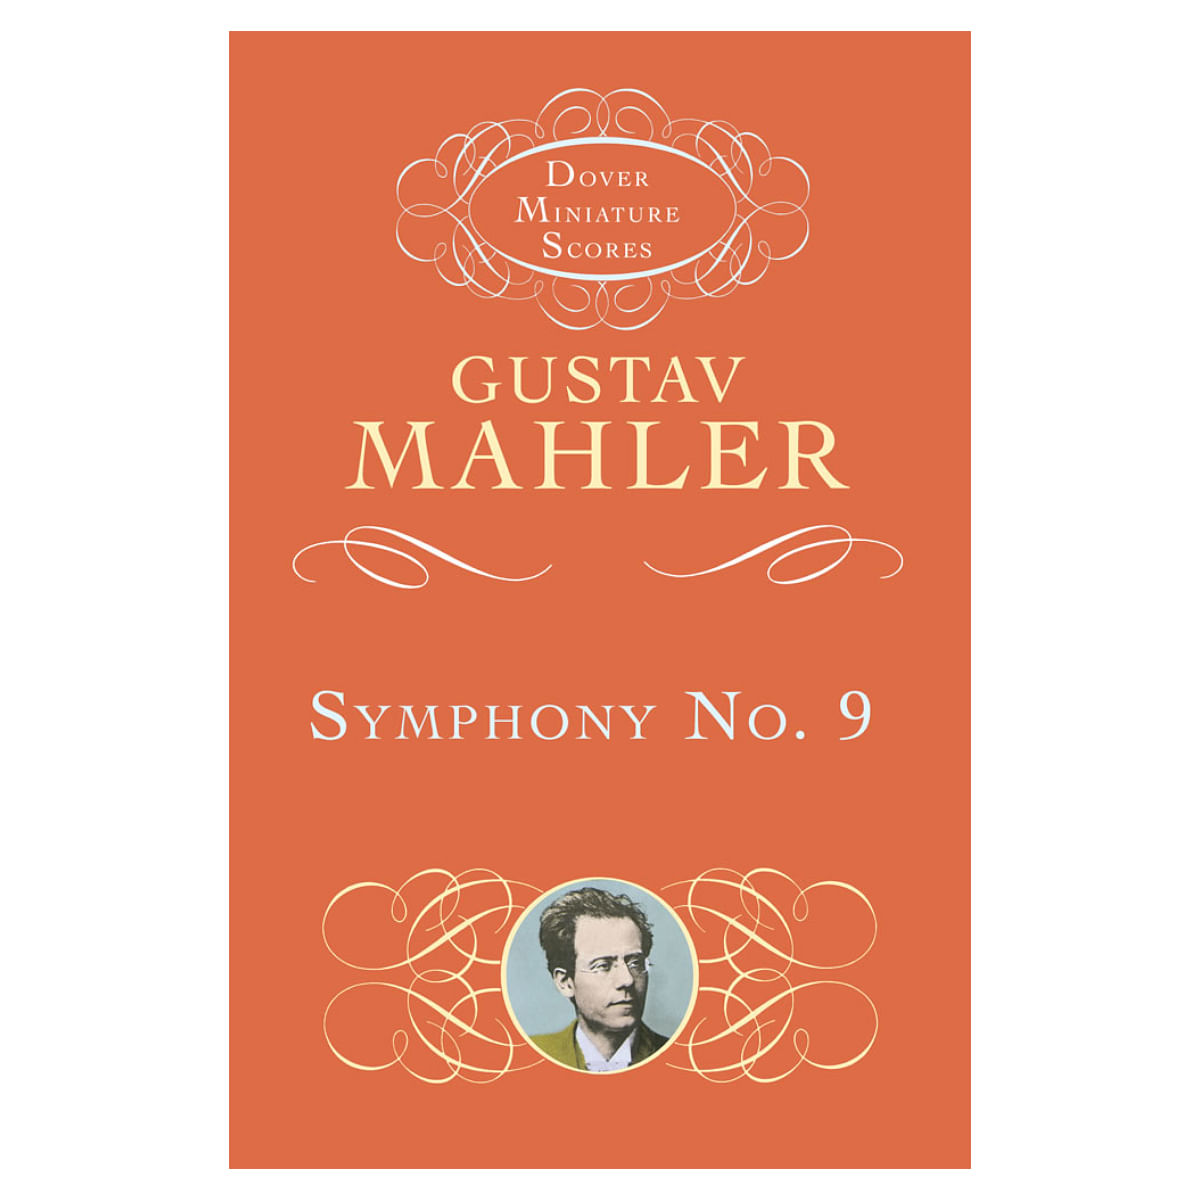 Books　No　-Orchestral　in　Music　Buy　Best　Orchestral　Score　Mahler　Symphony　G,　India